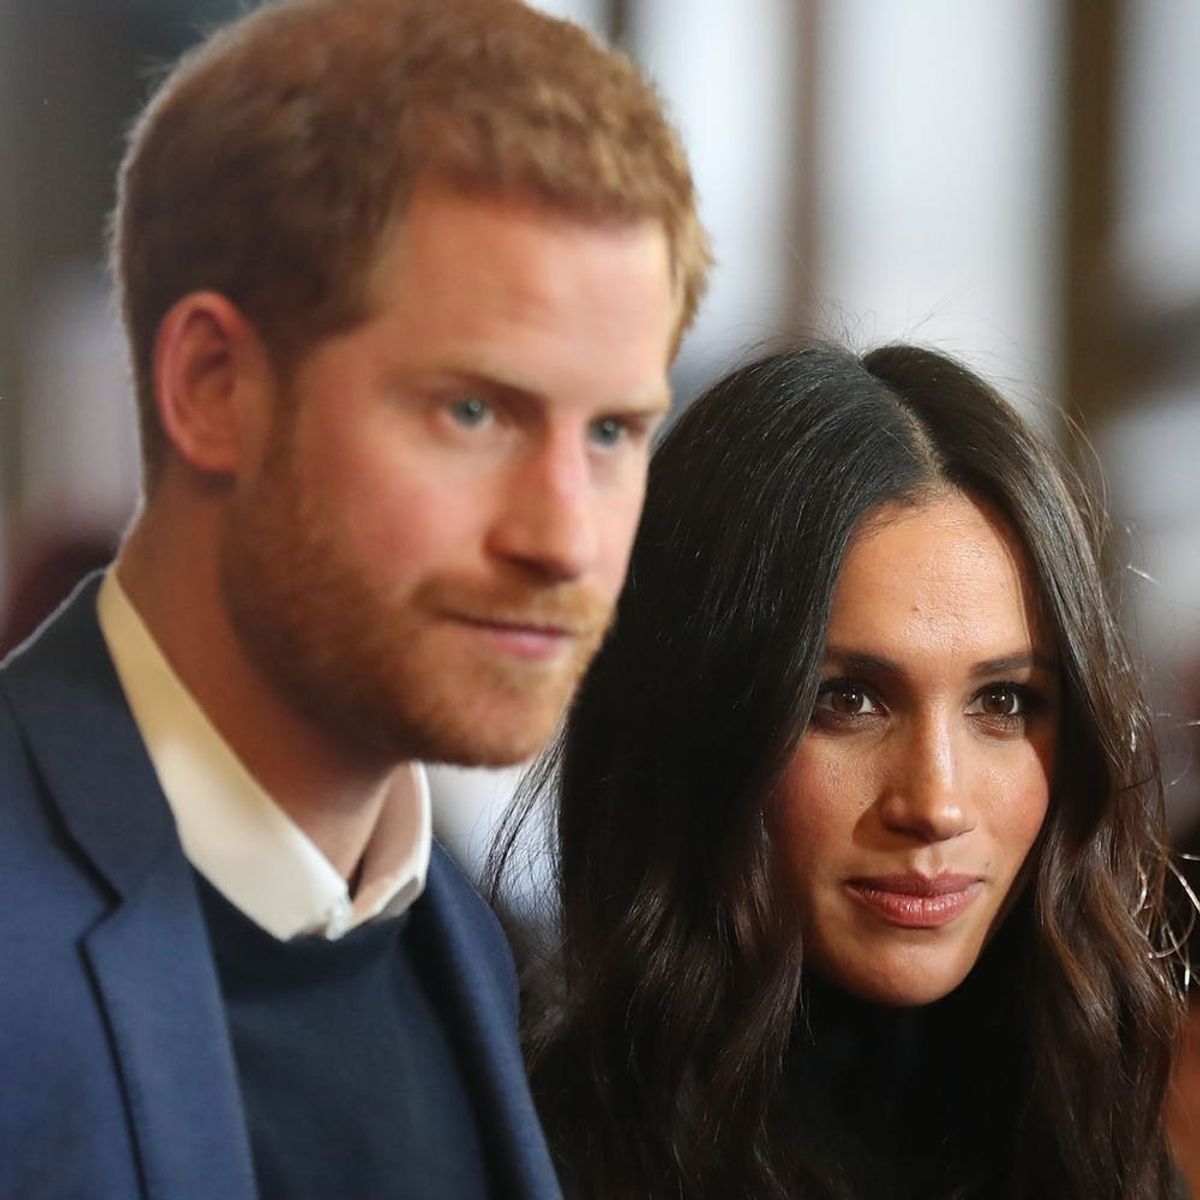 This Perfume Inspired Prince Harry and Meghan Markle’s Own Custom Wedding Scent